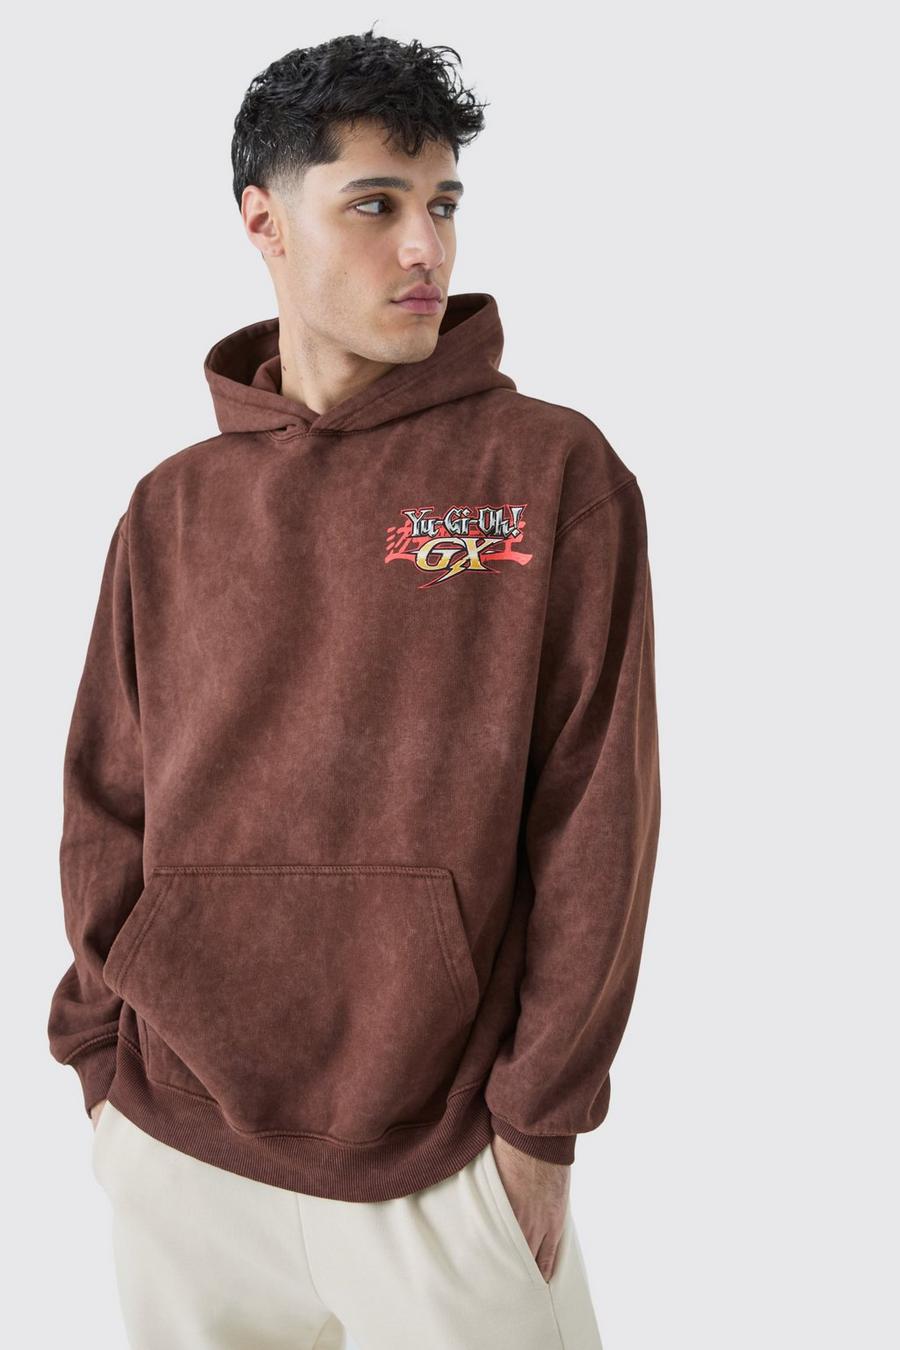 Brown Oversized Washed Yugioh Gx License Hoodie